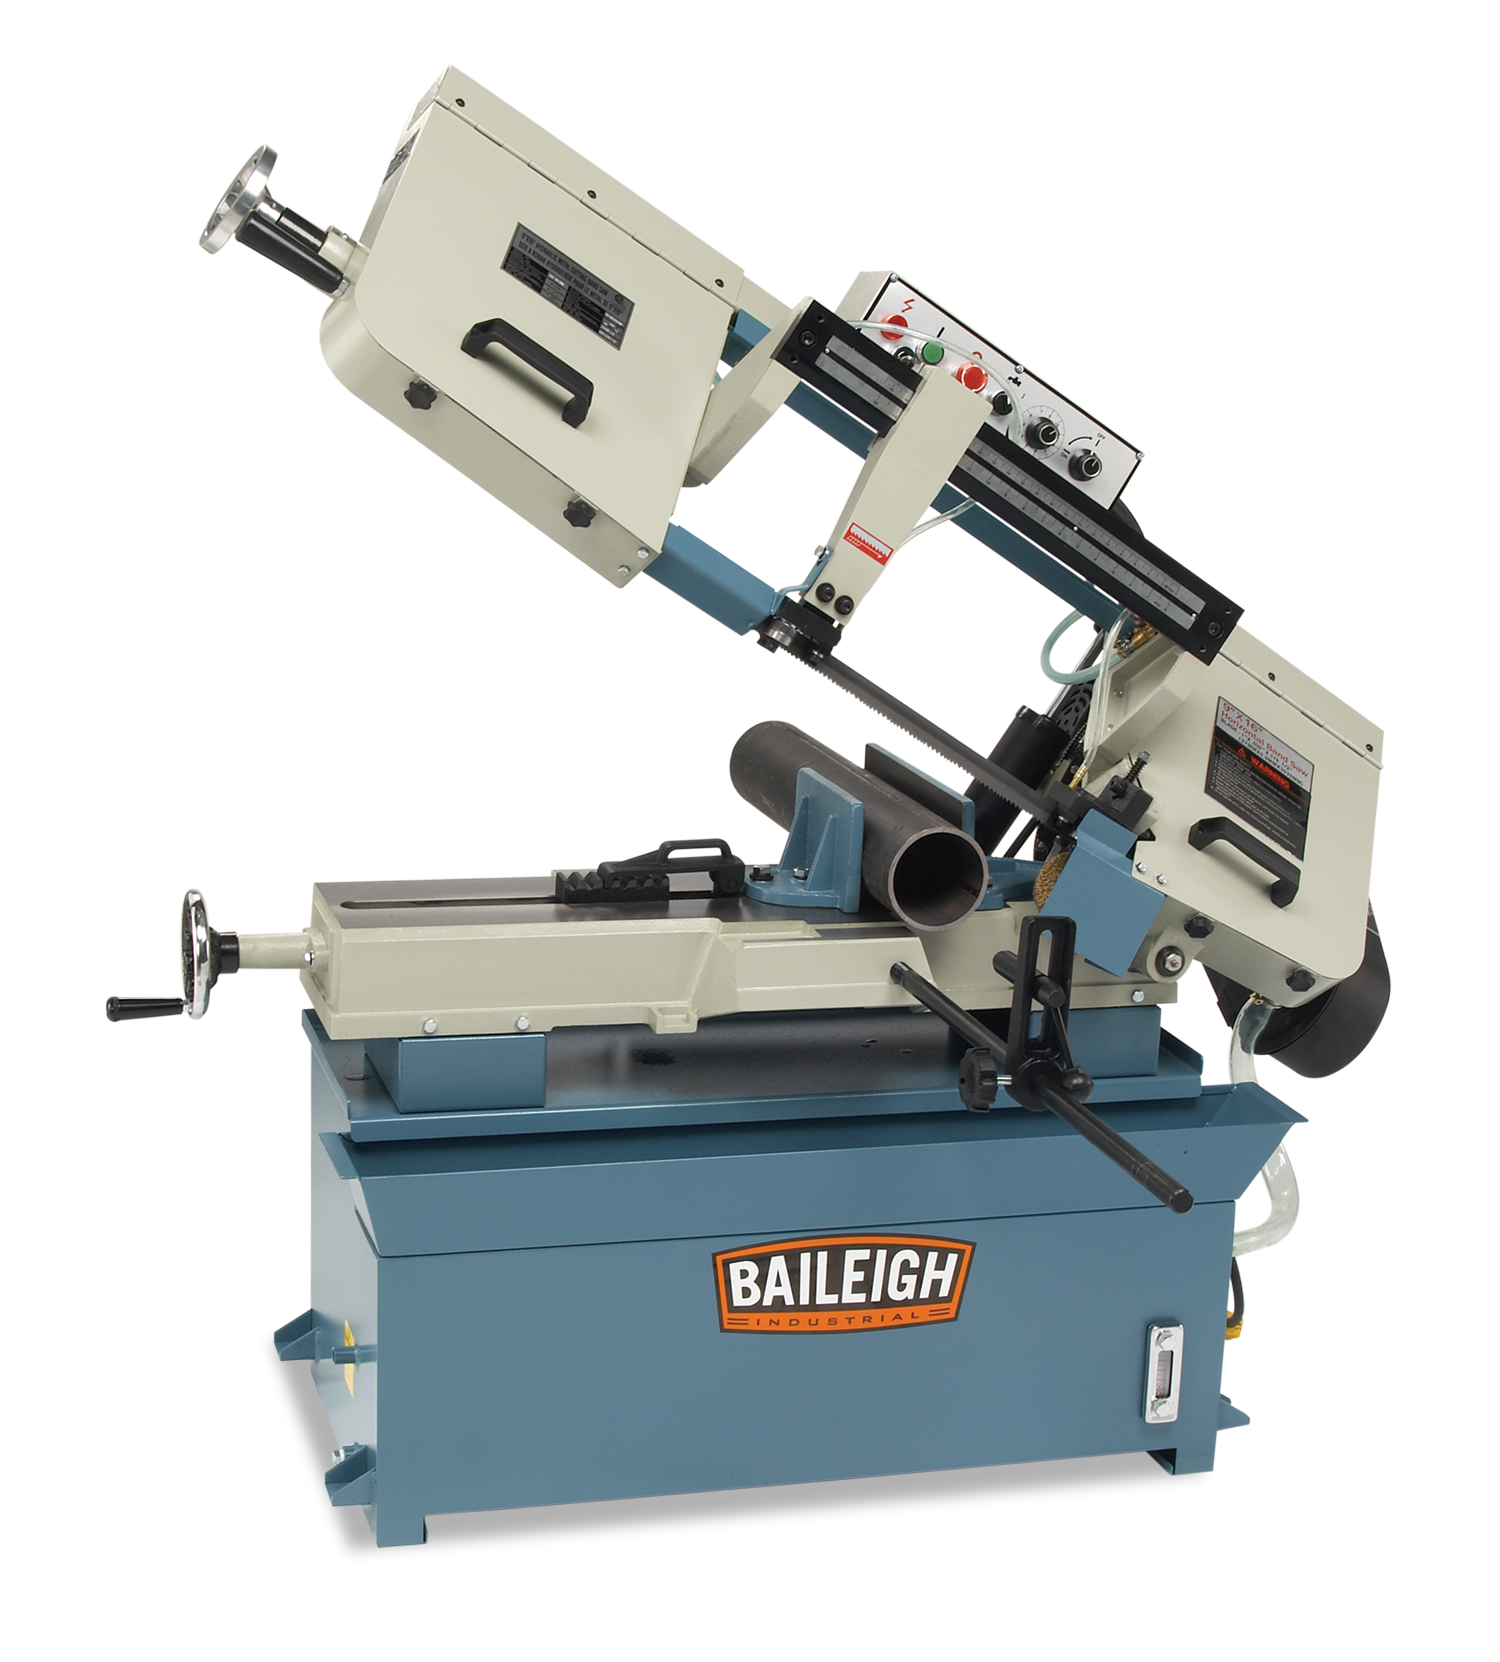 Baileigh BS-916M 240V 1 Phase Metal Cutting Band Saw Mitering Vice 1" Blade Width